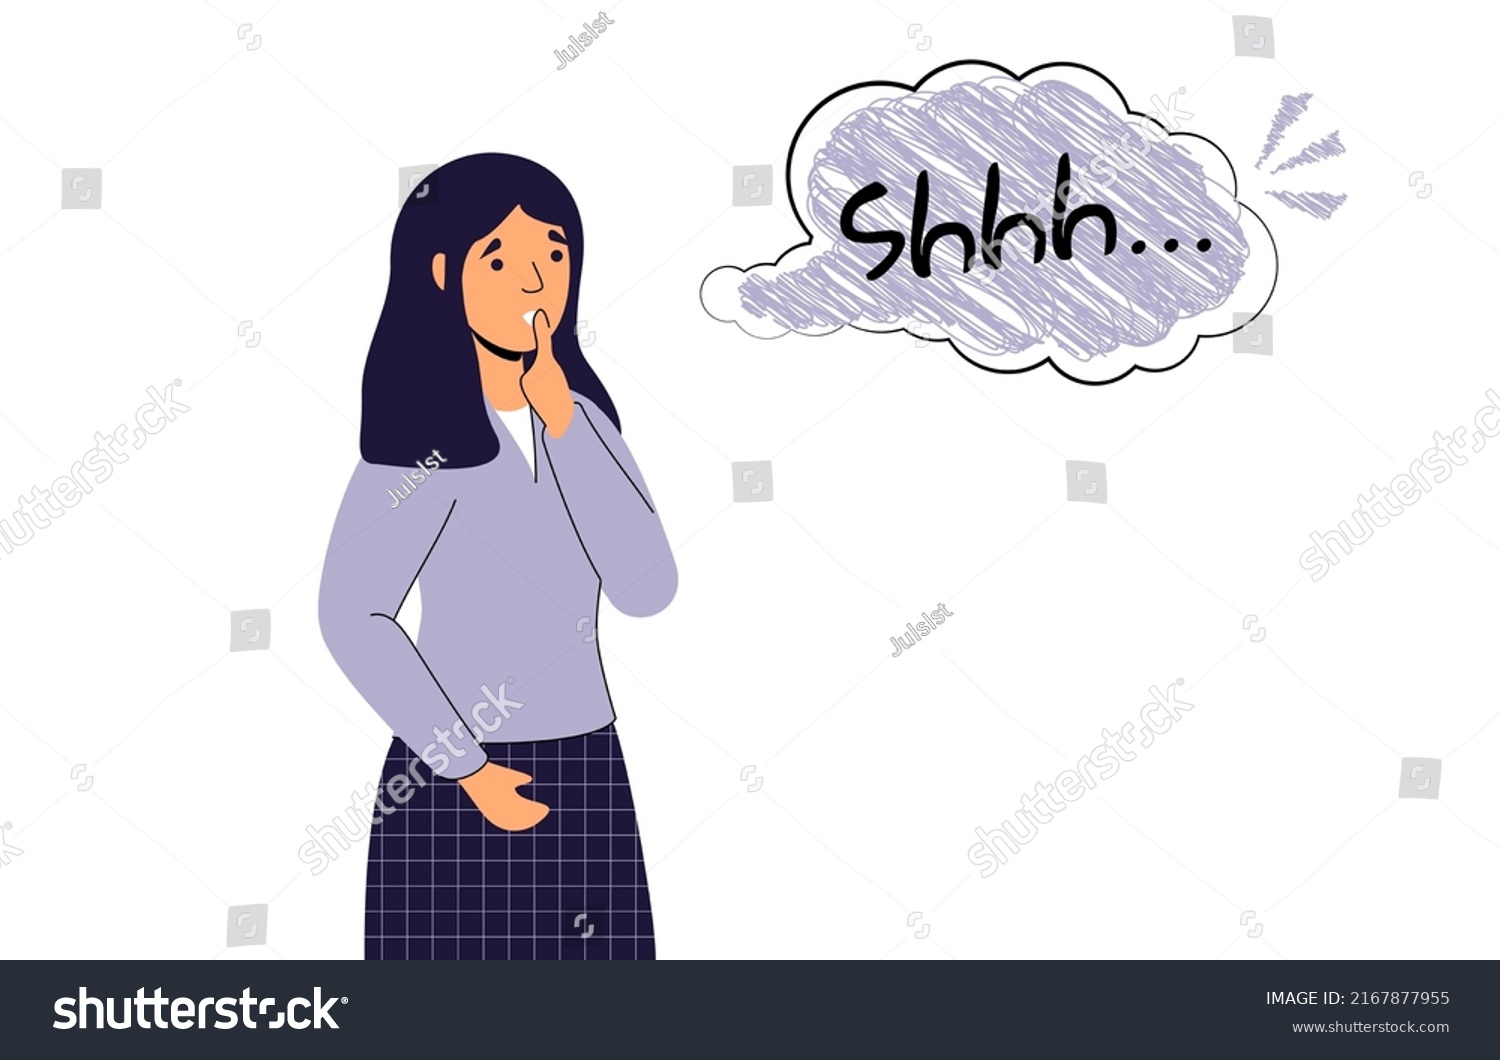 SVG of Shhh word Comic peech bubble cloud Sign for psssst shhh sleeping or not sound Vector illustration for silence, keeping quiet, secrecy concept in pop art style No speaking No talking Word-of-mouth svg